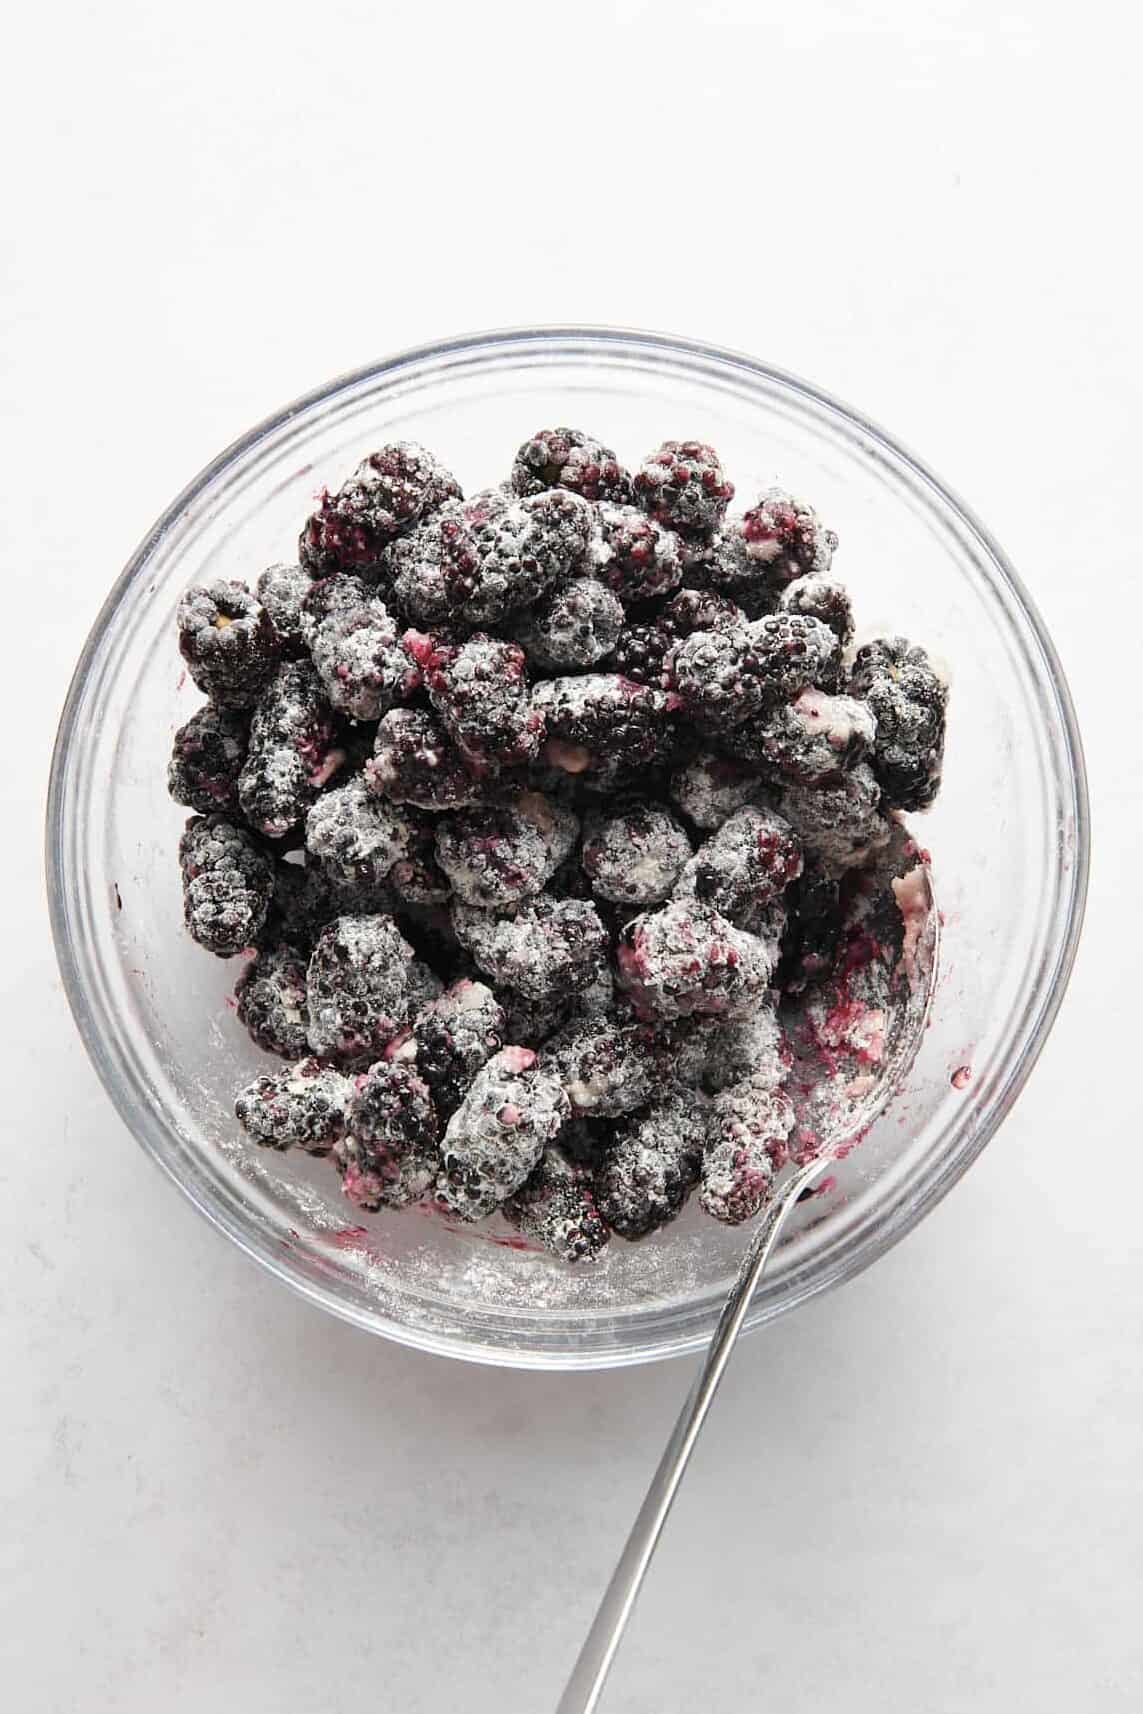 blackberries tossed and coated in a sugar, lemon, flour mixture sitting in a large glass bowl